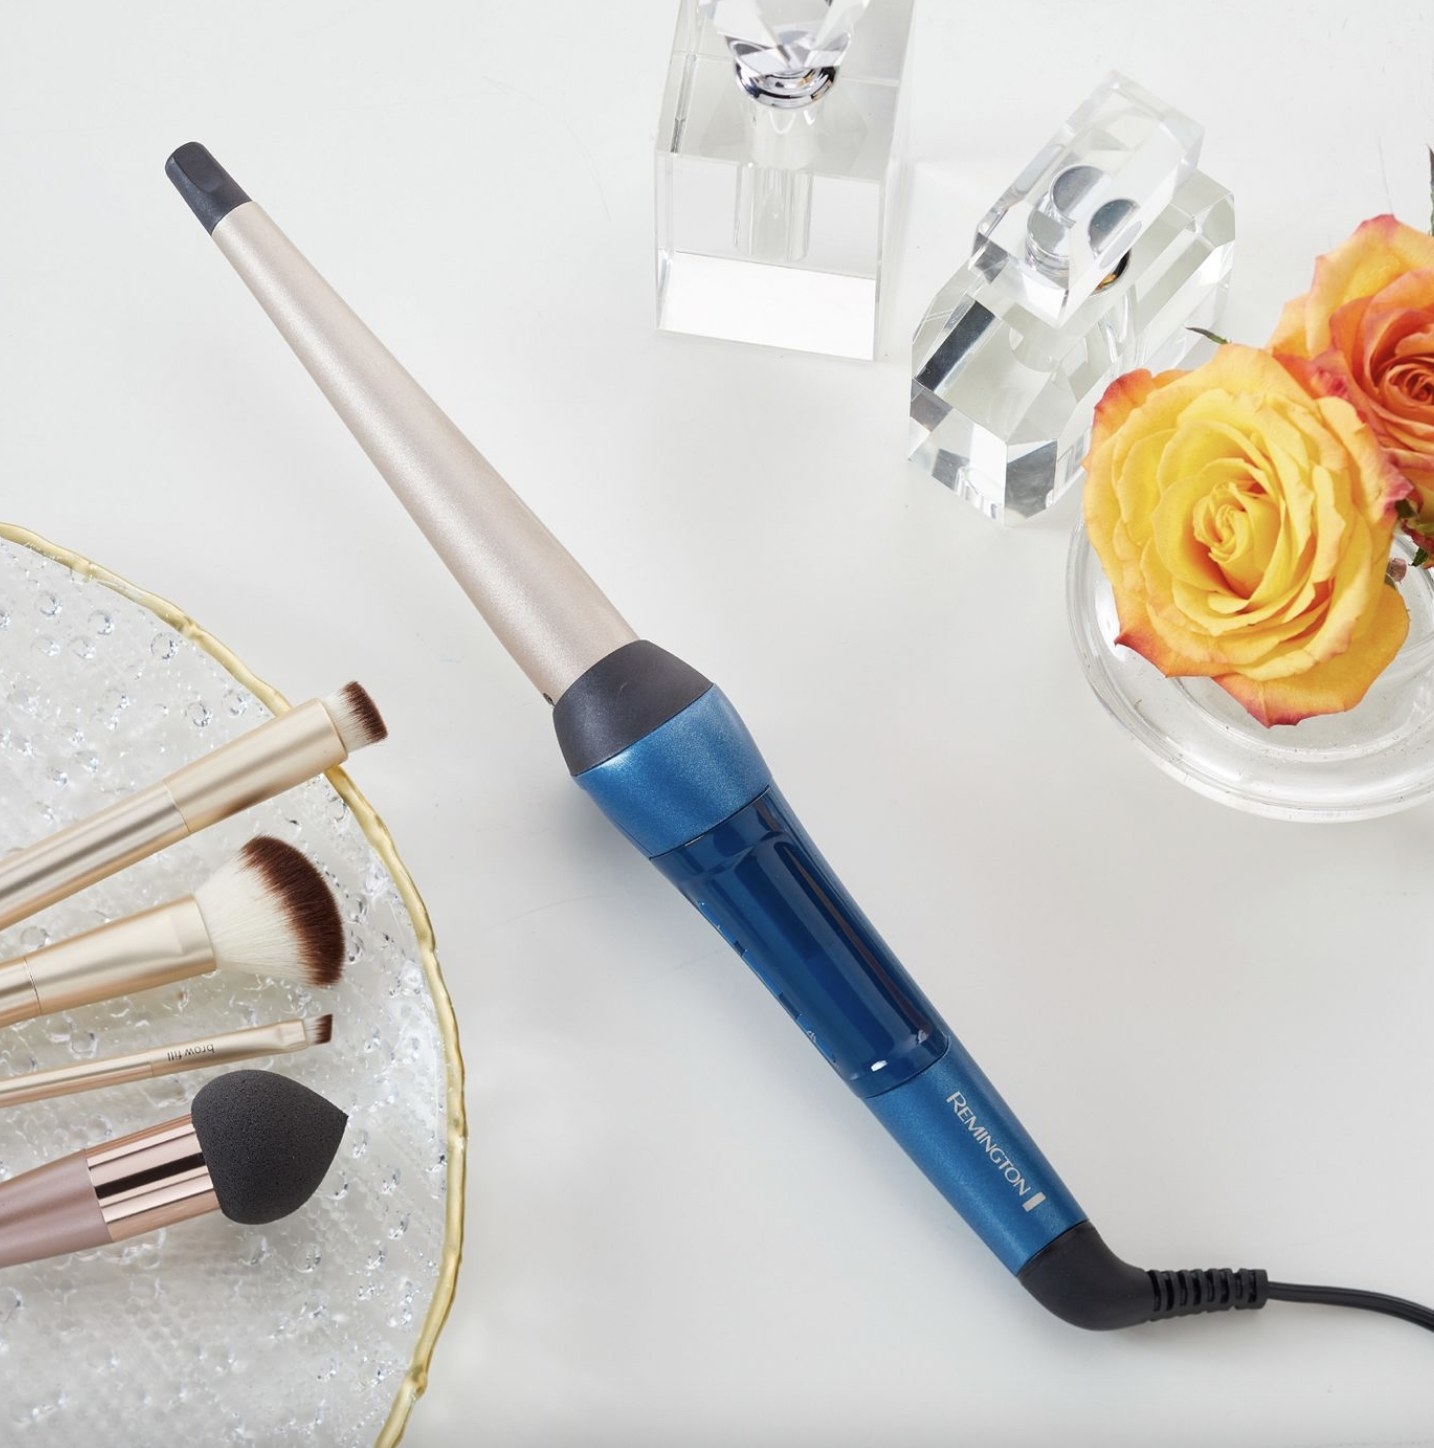 A curling wand, makeup brushes, and a rose